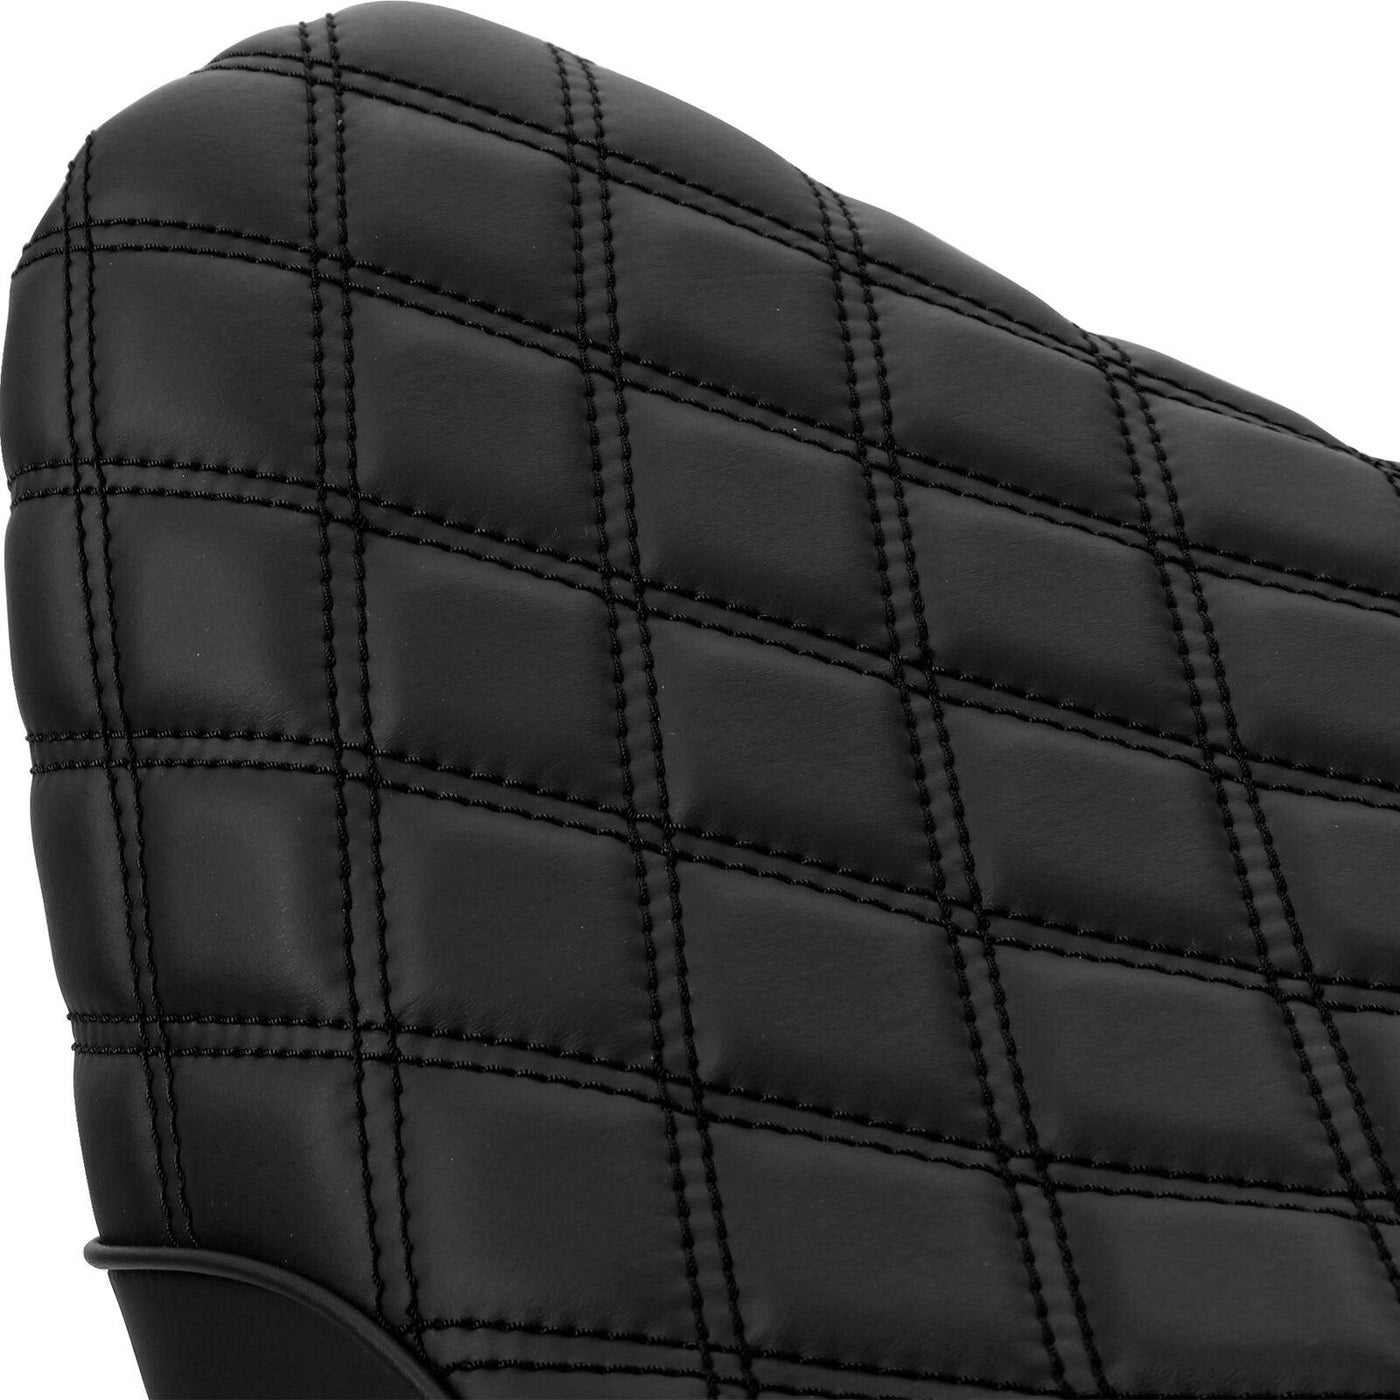 Black Driver Passenger Seat Fit For Harley Street Bob Softail 2018-2022 Deluxe - Moto Life Products